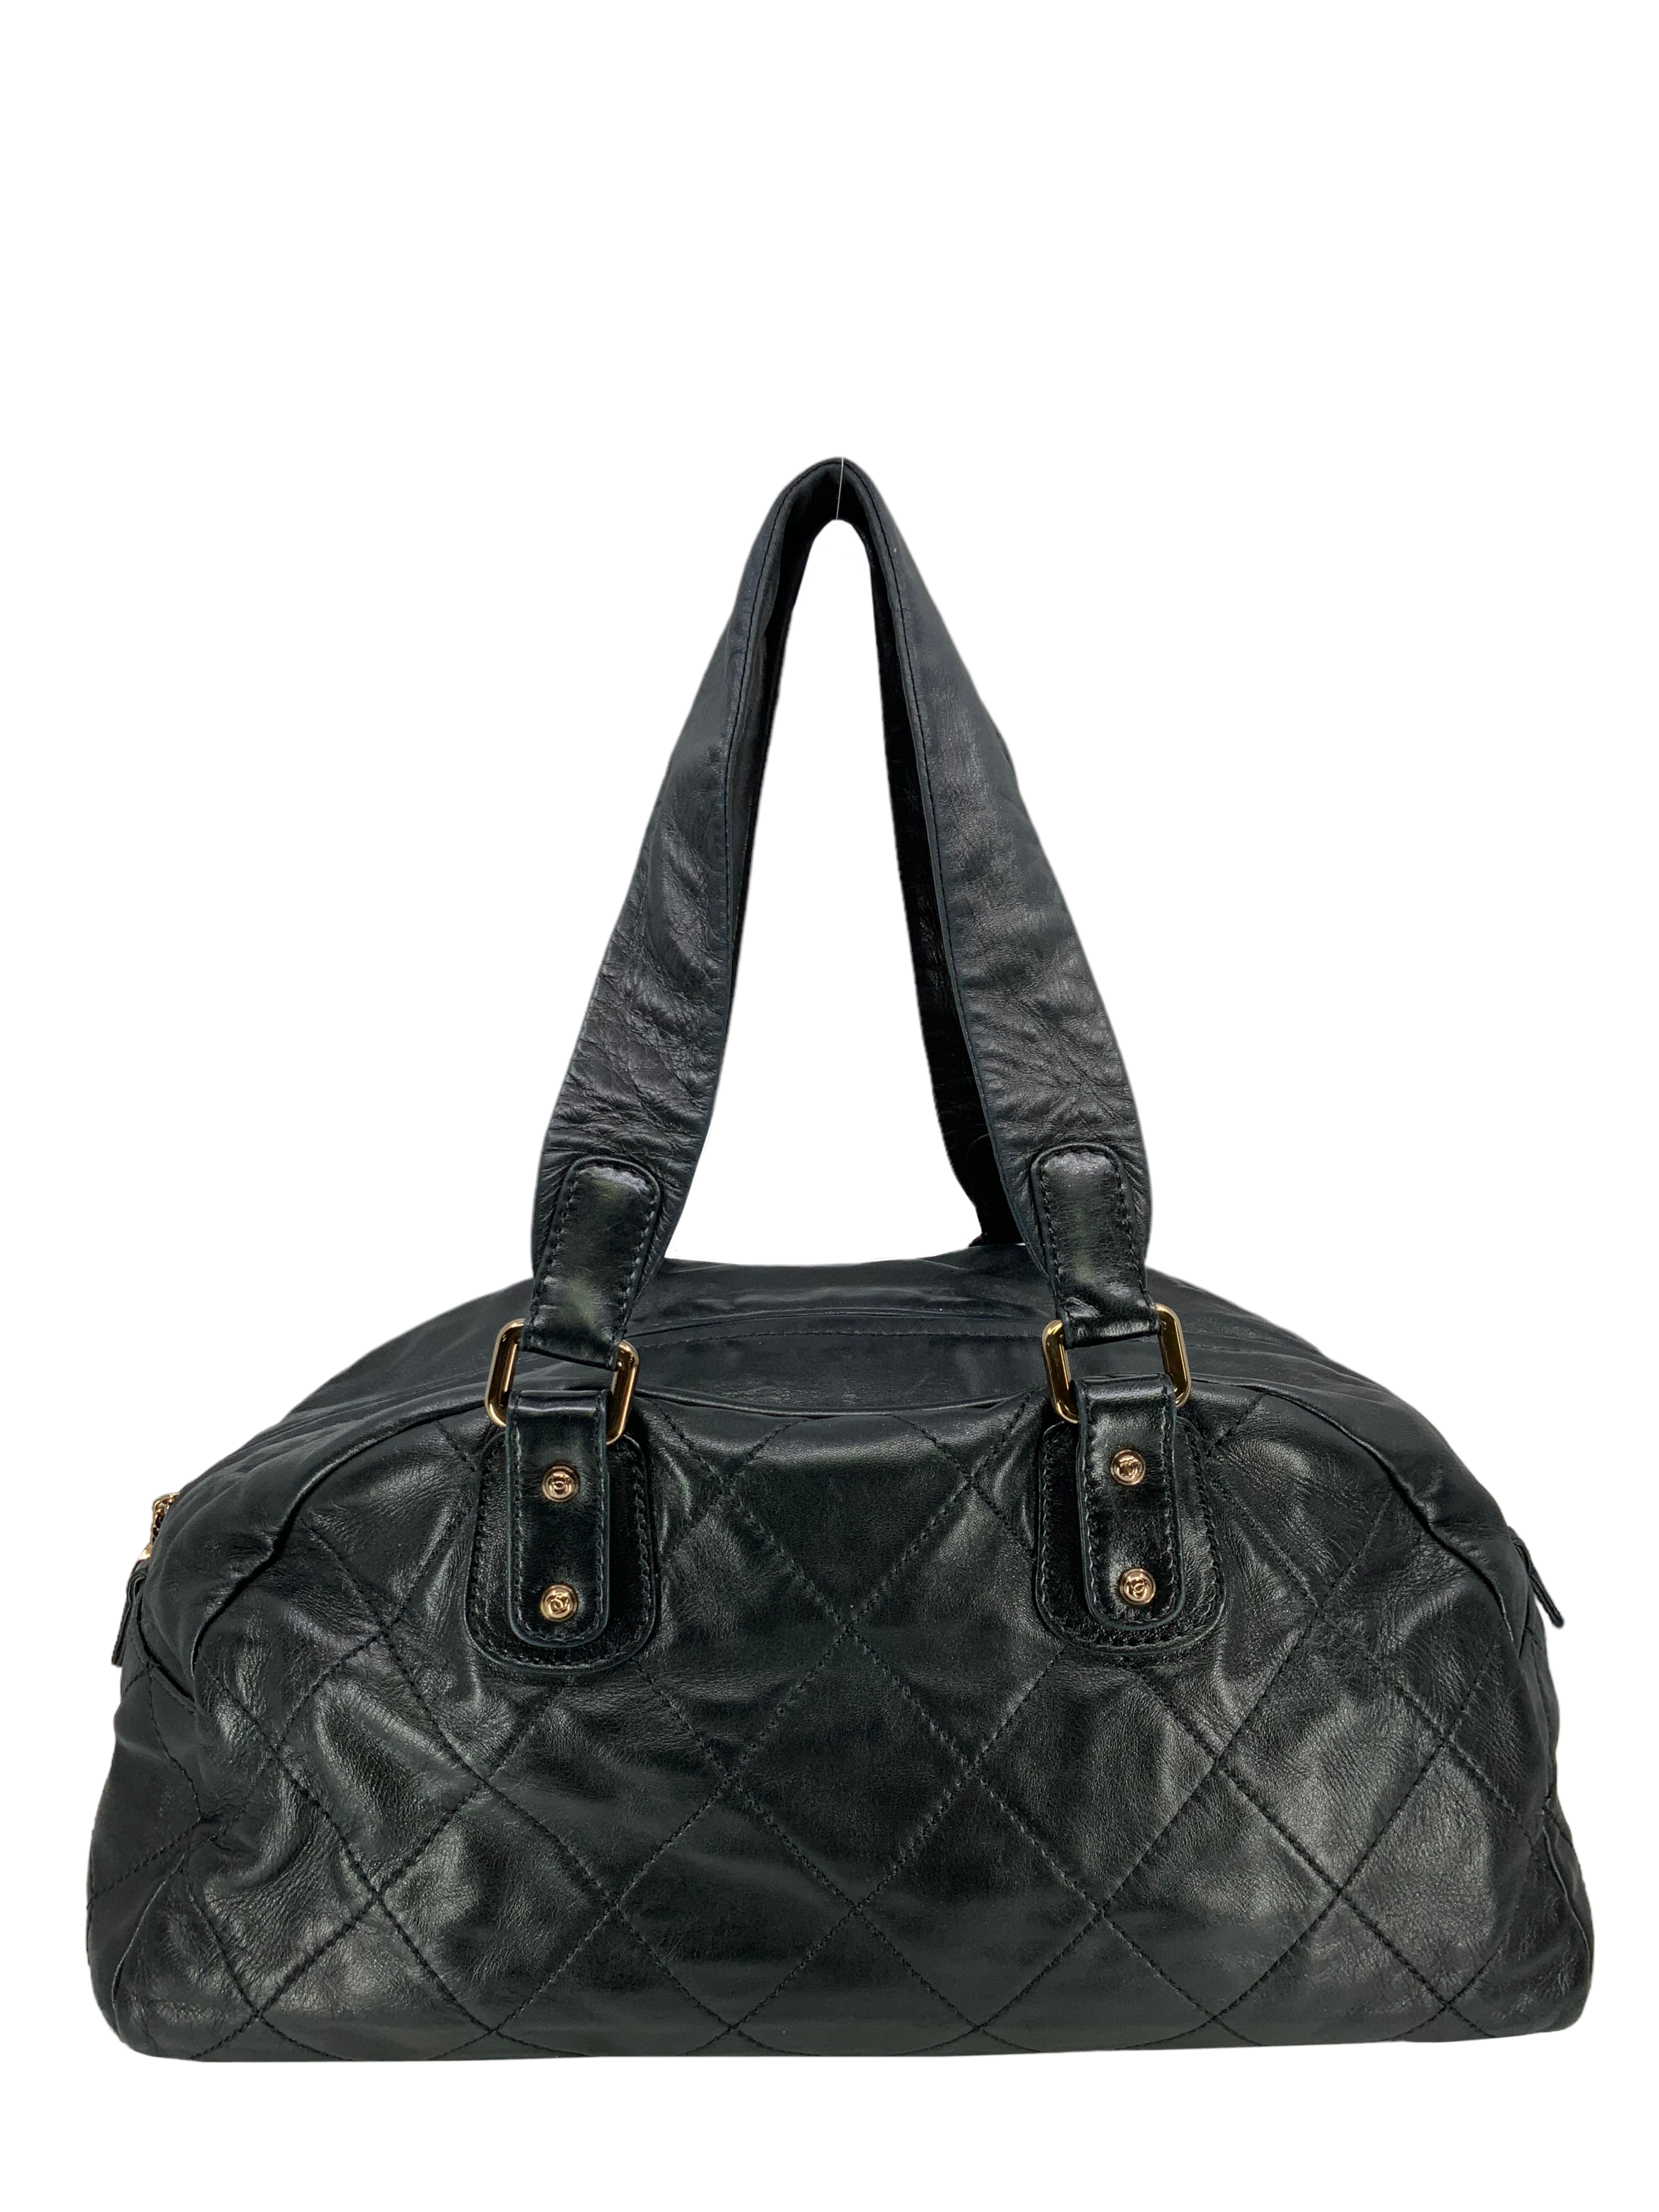 Chanel Quilted Lambskin Hobo Bag